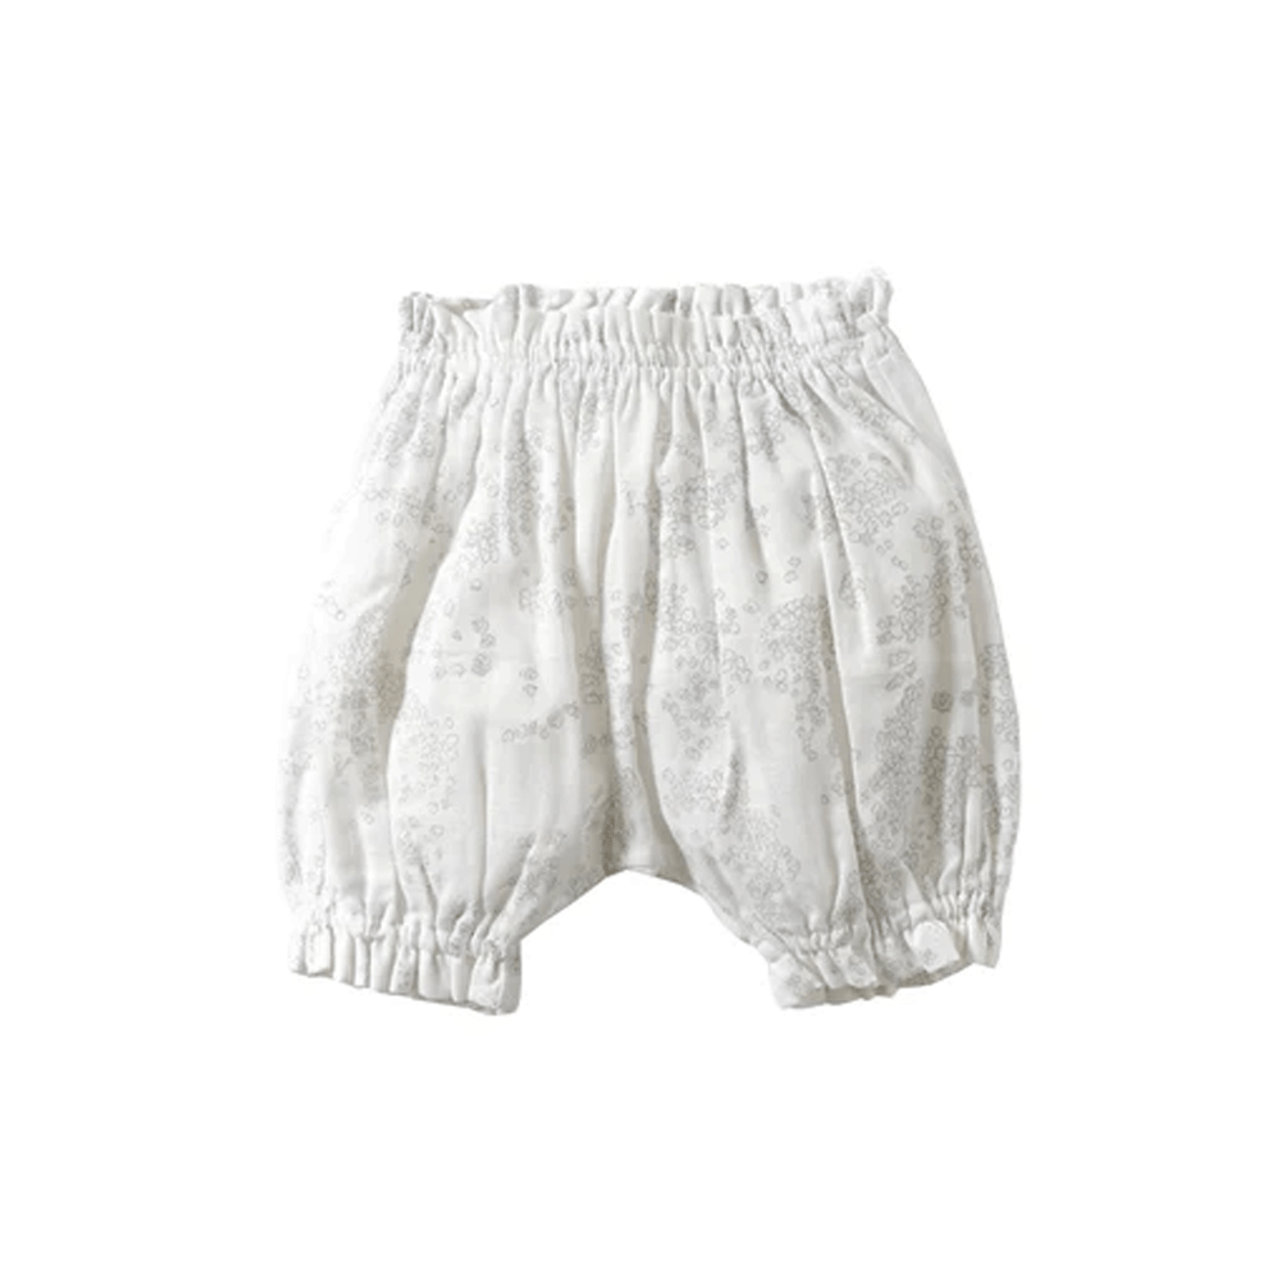 Hommage bloomers white 22SS 70-90cm